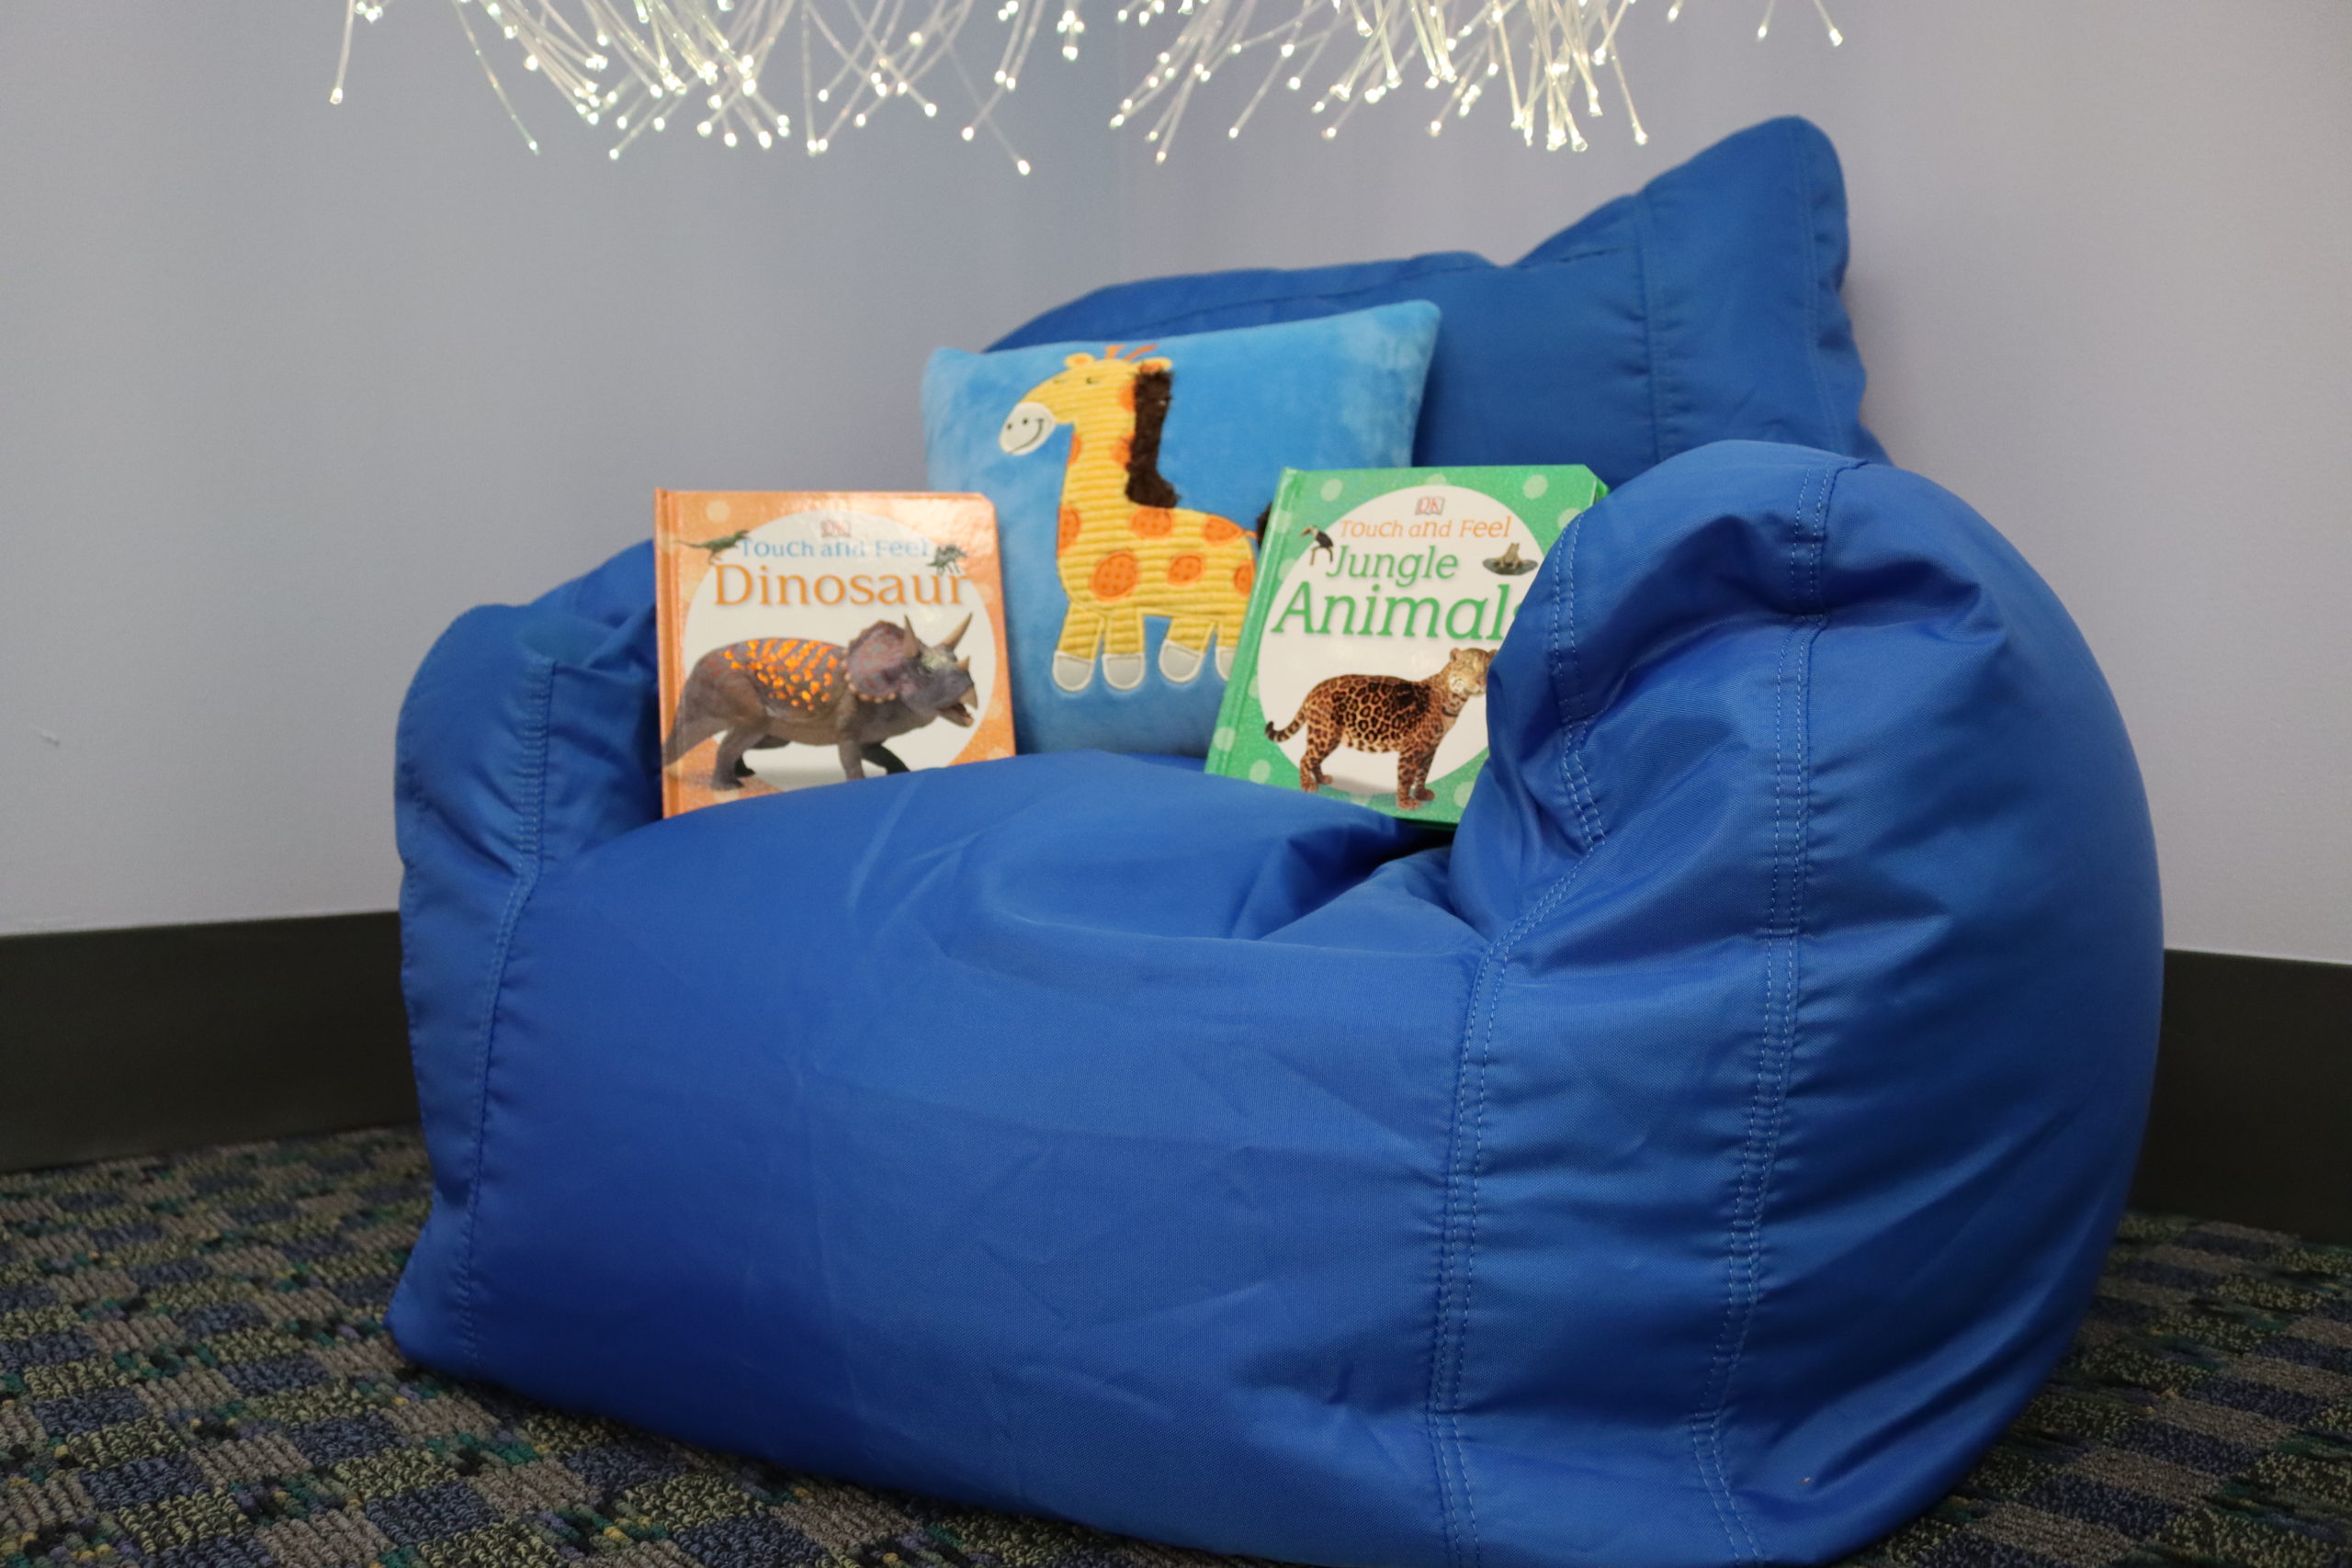 Sensory pillow set, Touch and Feel book set